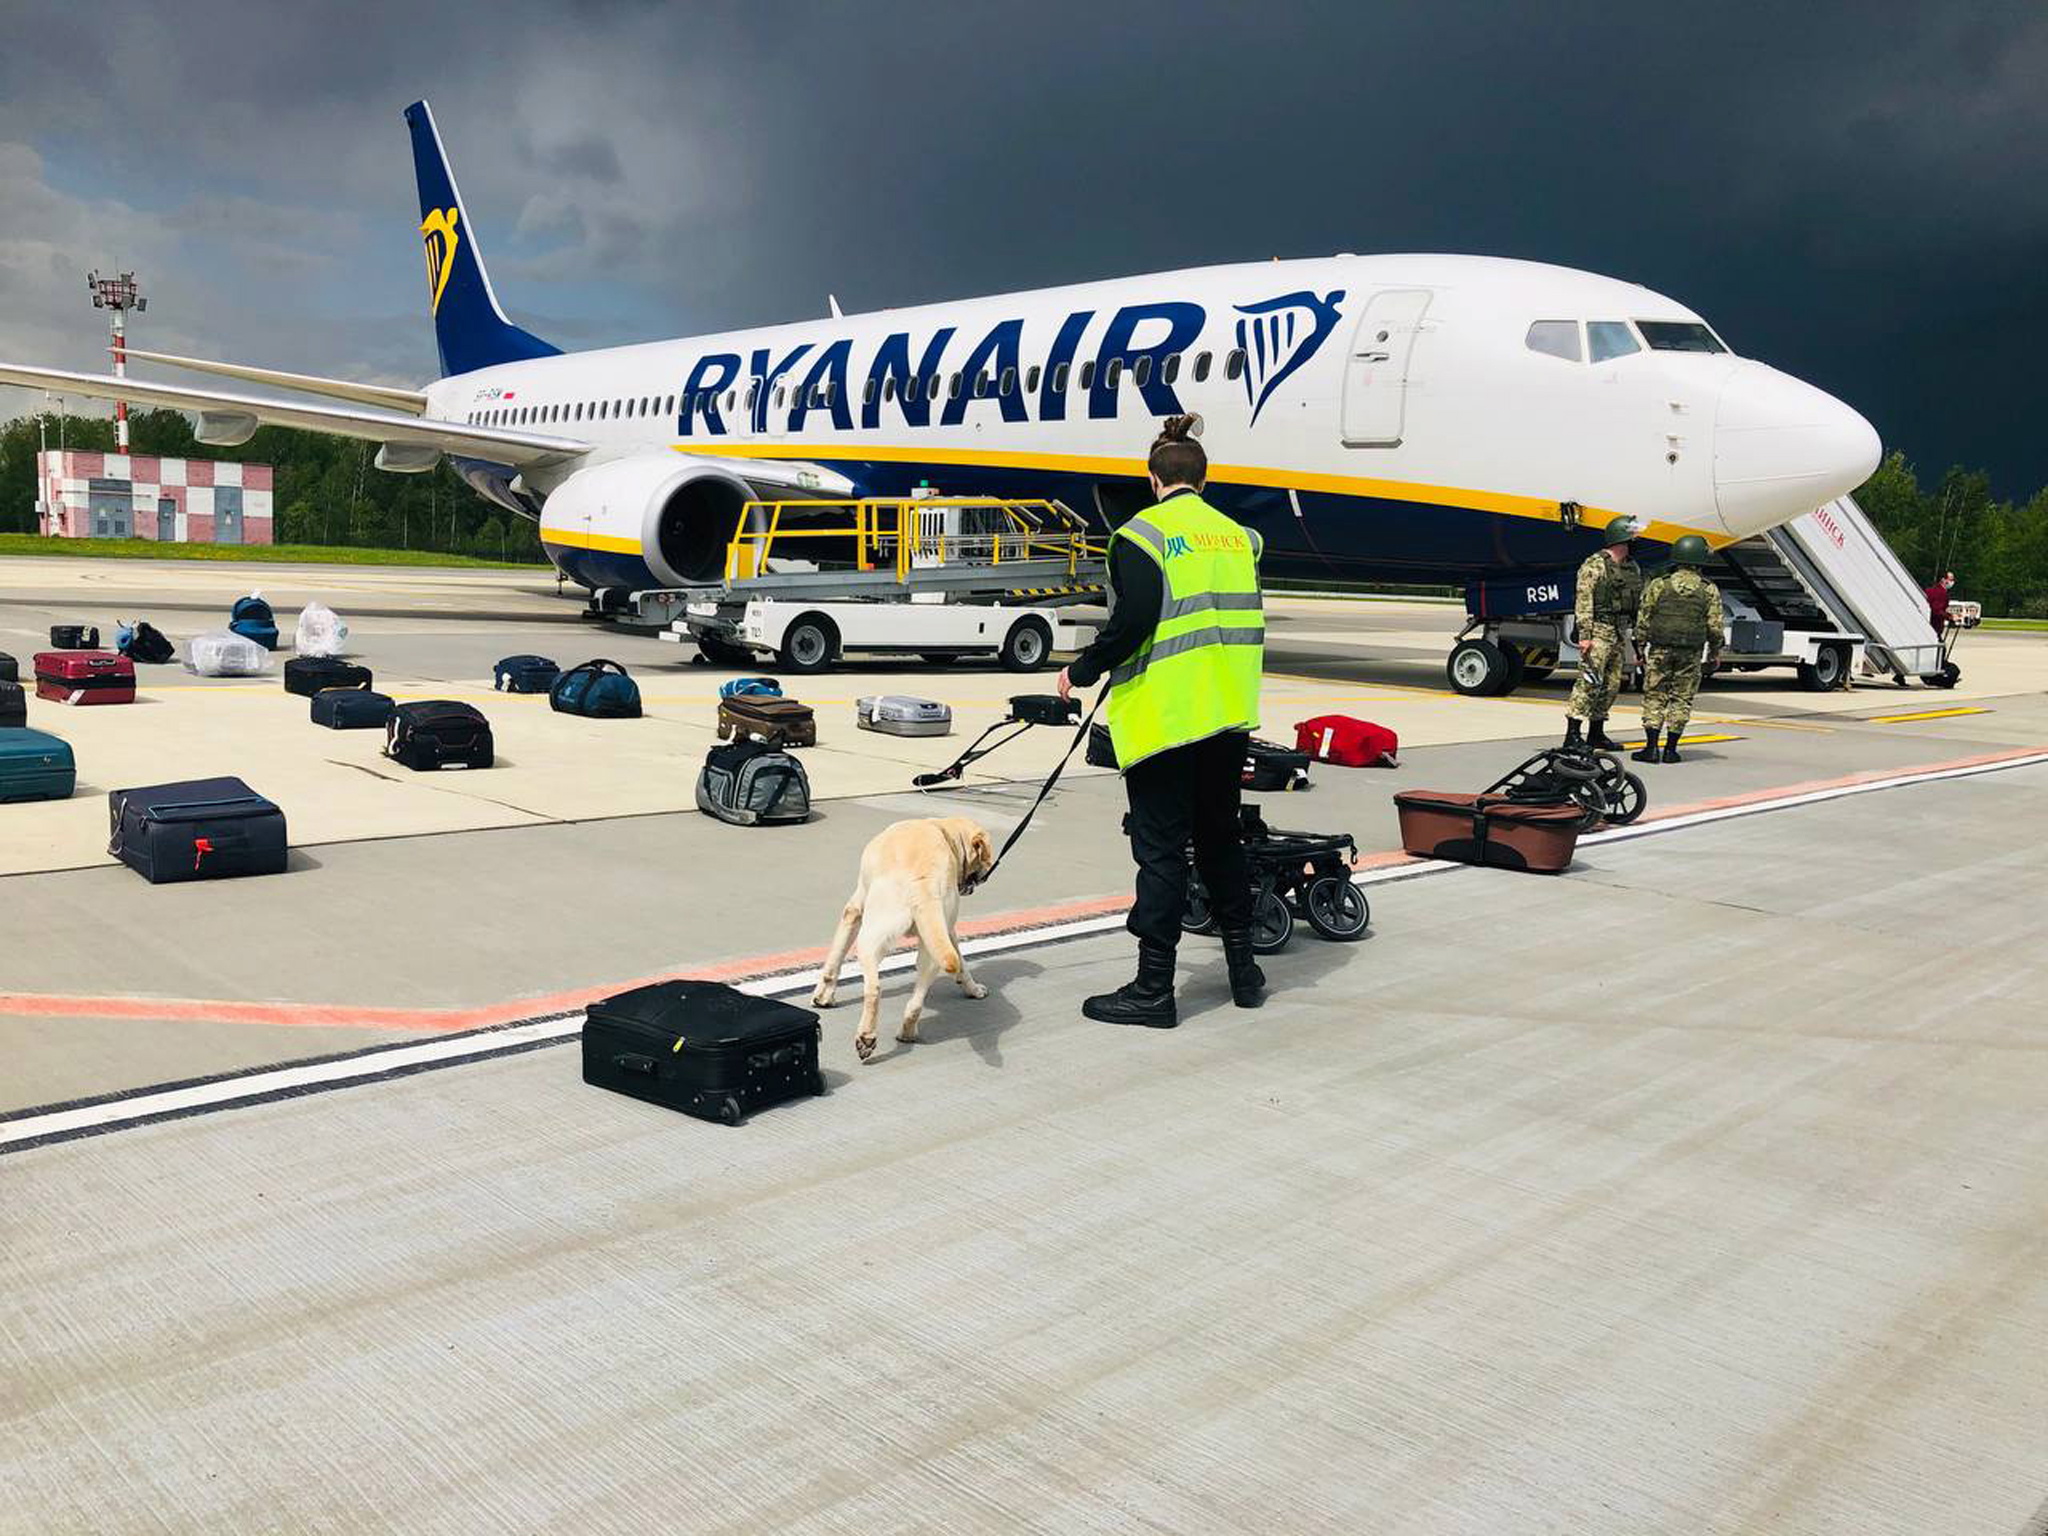 epa09224989 A handout photo made available by ONLINER.BY shows security with a sniffer dog checking the luggage of passengers in front of Ryanair Boeing 737-8AS (flight FR4978), carrying opposition figure Roman Protasevich, in Minsk, Belarus, 23 May 2021 (issued 24 May 2021). A Ryanair flight from Athens, Greece to Vilnius, Lithuania, with Belarus' opposition journalist Roman Protasevich onboard, was diverted and forced to land in Minsk on 23 May 2021, after an alleged bomb threat. Protasevich was detained by Belarusian Police after landing, as Belarusian Human Rights Center 'Viasna' reports, Lithuanian President Gitanas Nauseda demanded the immediate release of Protasevich.  EPA/ONLINER.BY HANDOUT -- BEST QUALITY AVAILABLE -- HANDOUT EDITORIAL USE ONLY/NO SALES